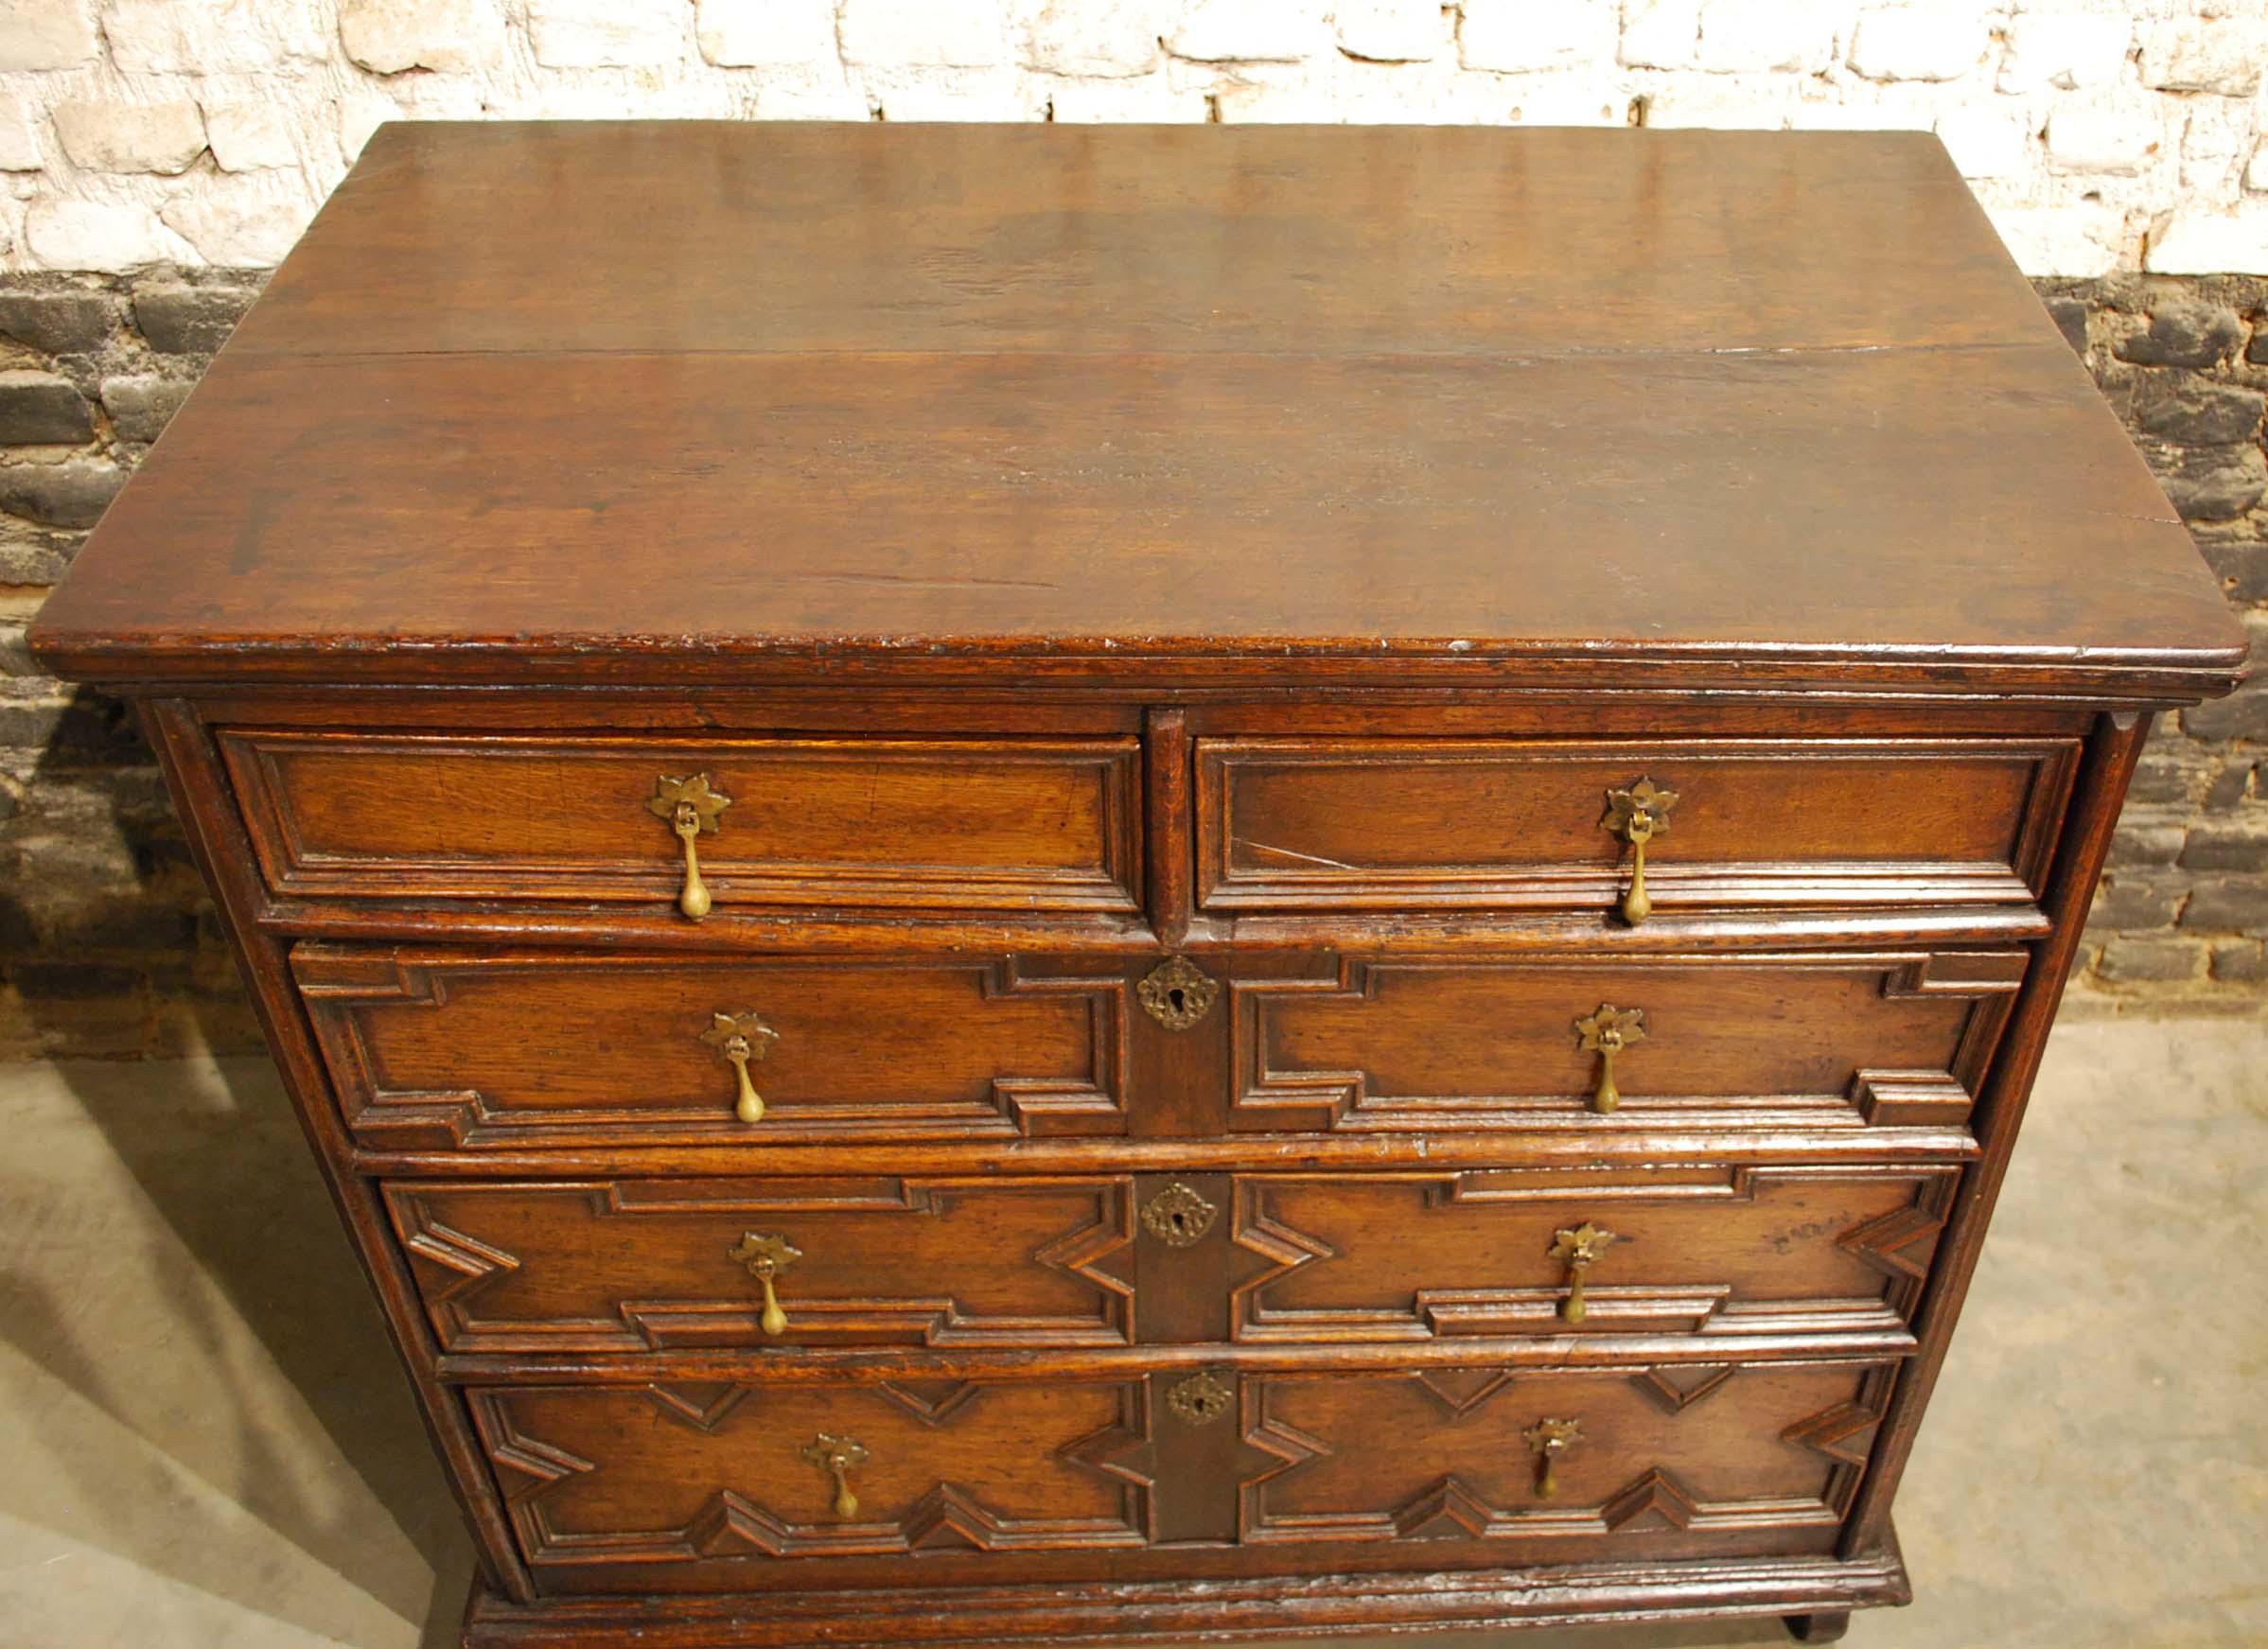 British Antique 17th Century Oak Charles II Chest of Drawers with Geometric Moulding